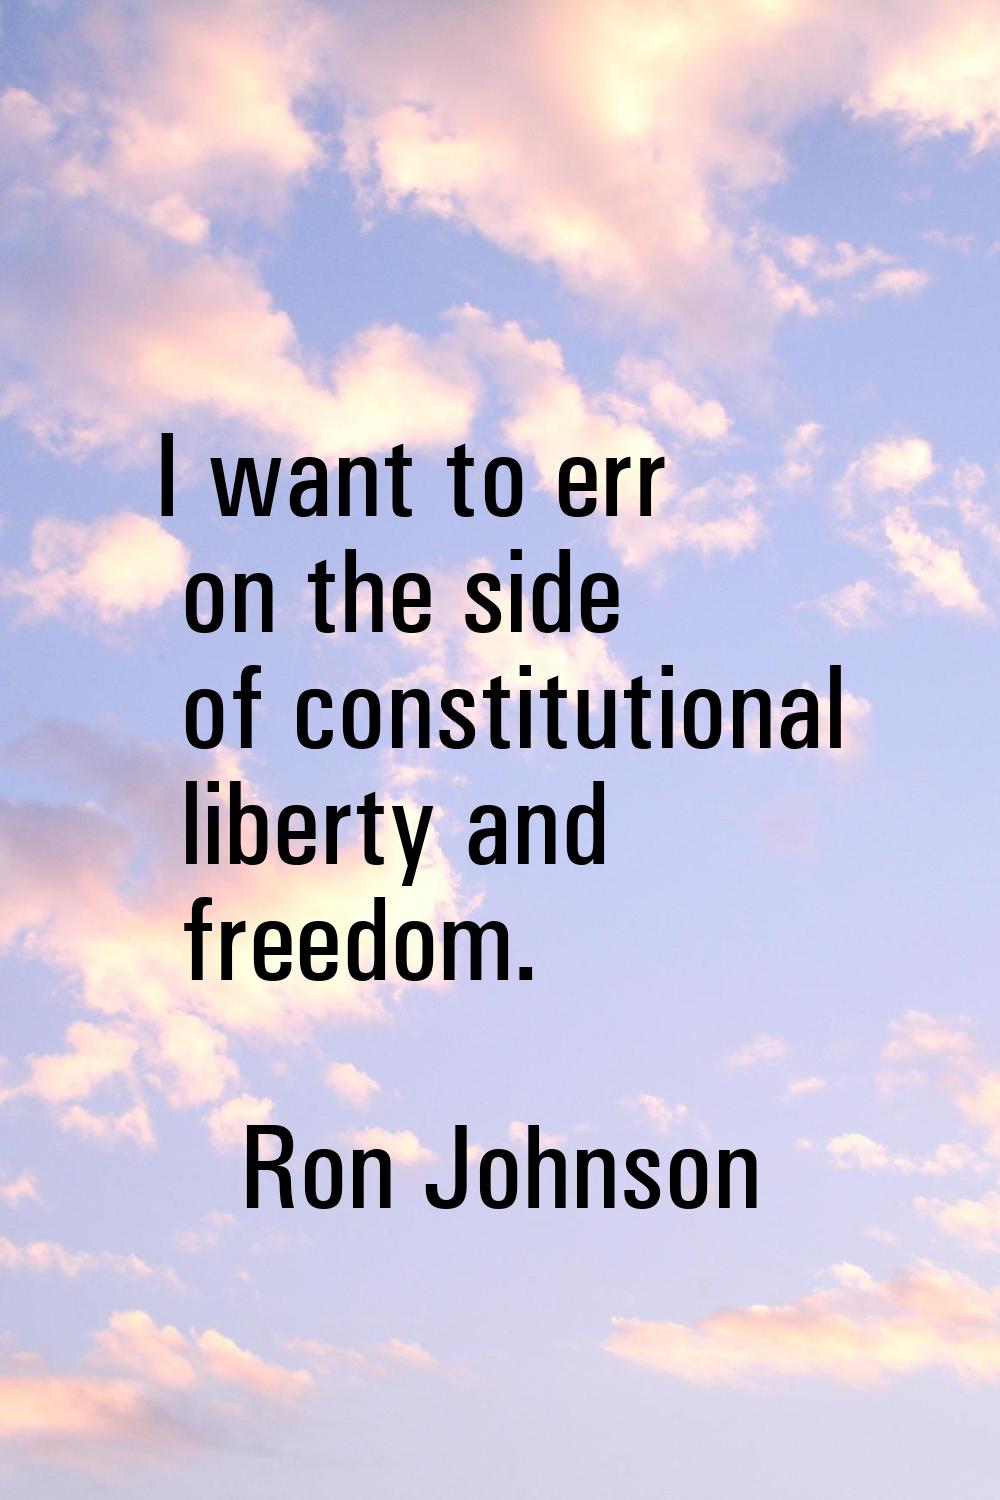 I want to err on the side of constitutional liberty and freedom.